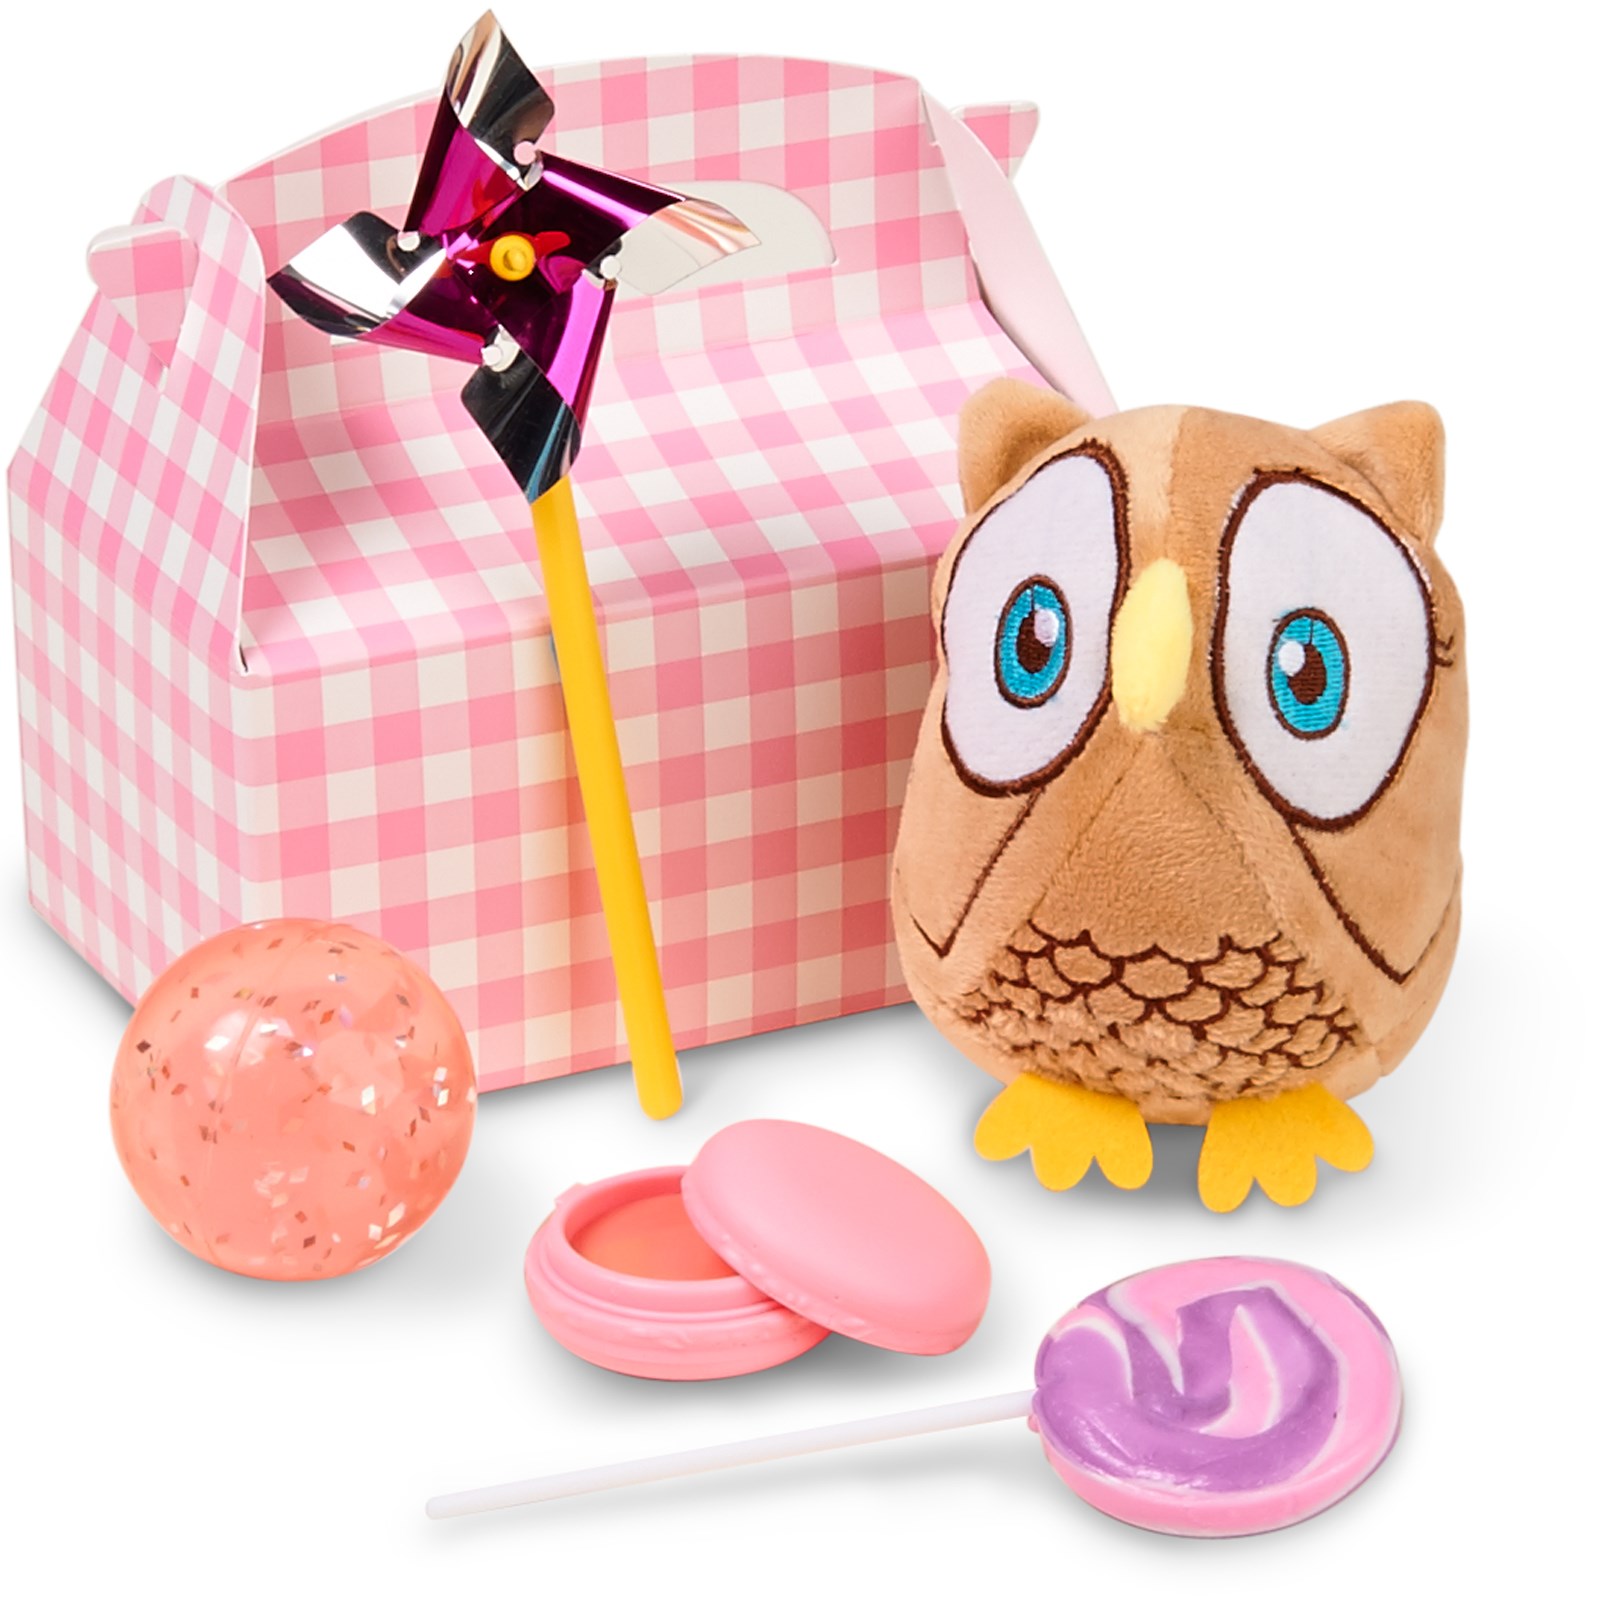 Look Whoo's 1 Pink Filled Party Favor Box